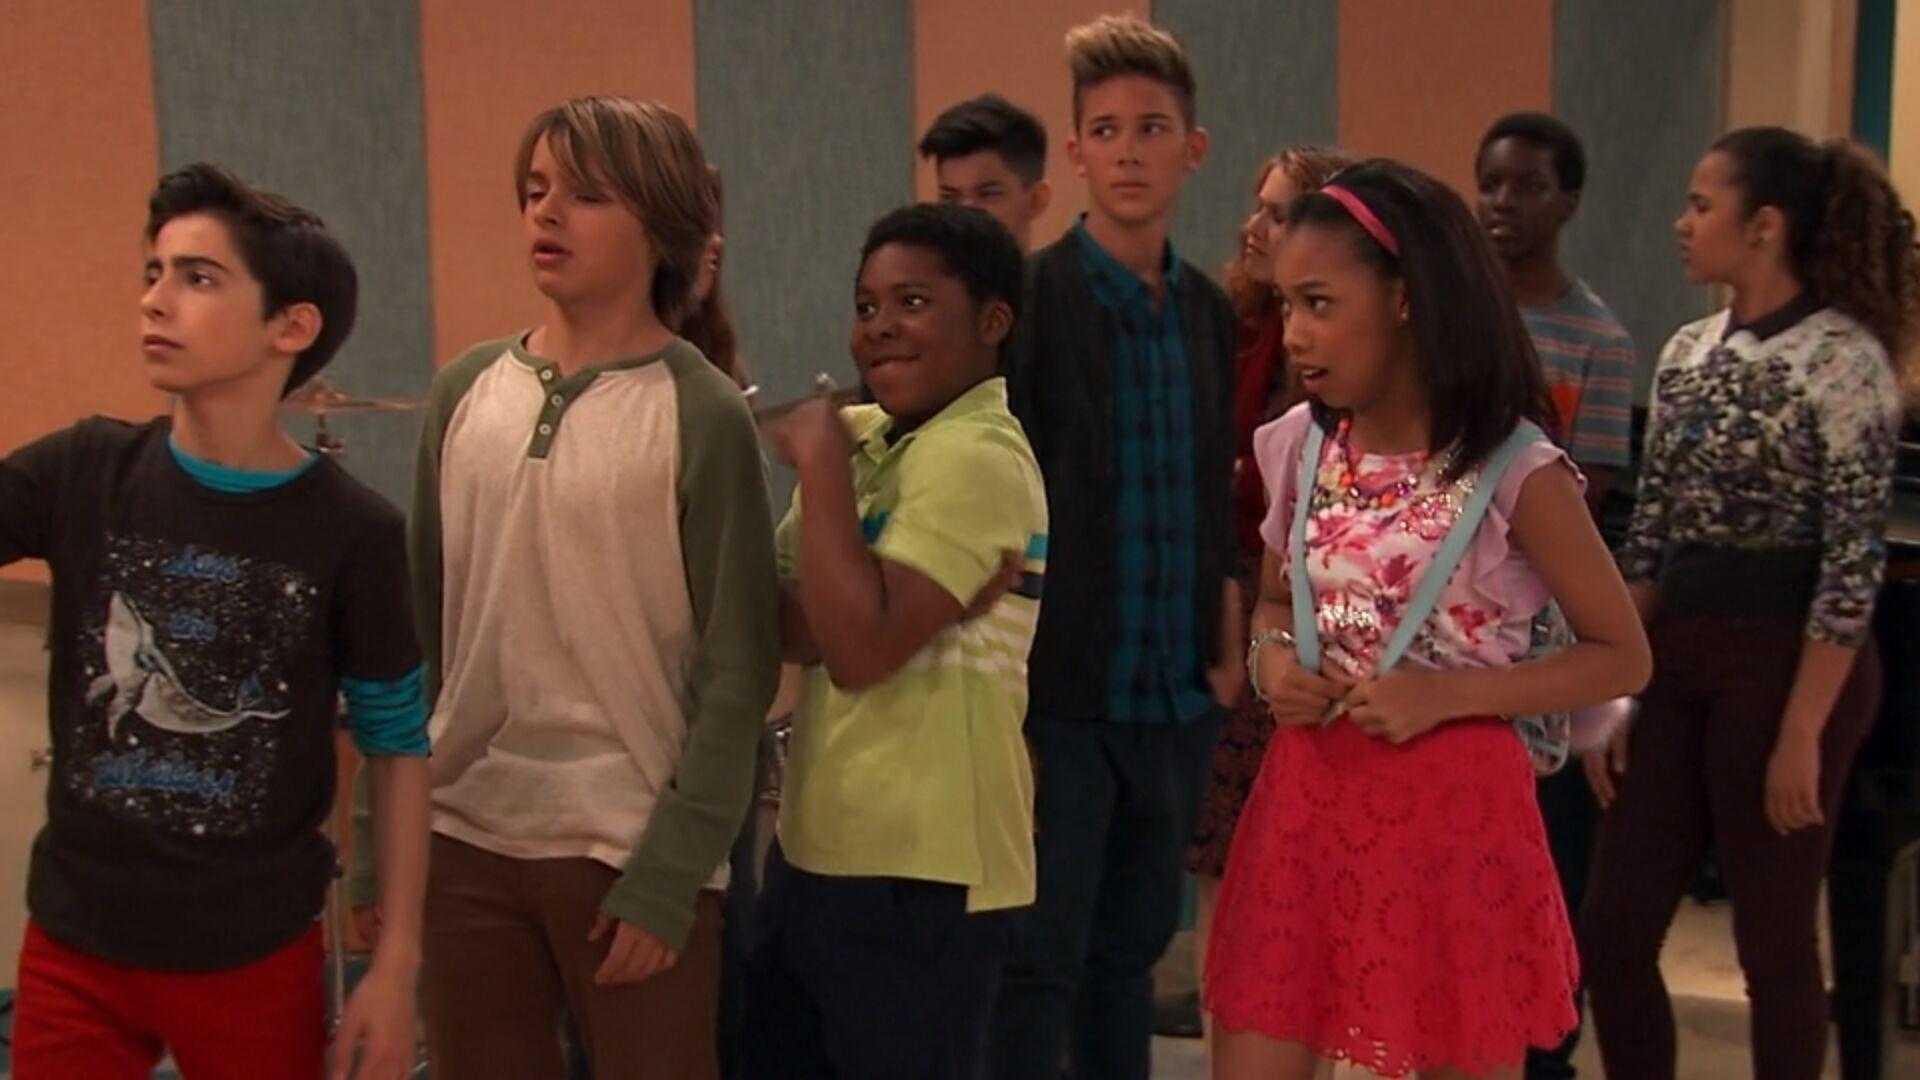 Picture of Grant Knoche in Nicky, Ricky, Dicky & Dawn Season 4